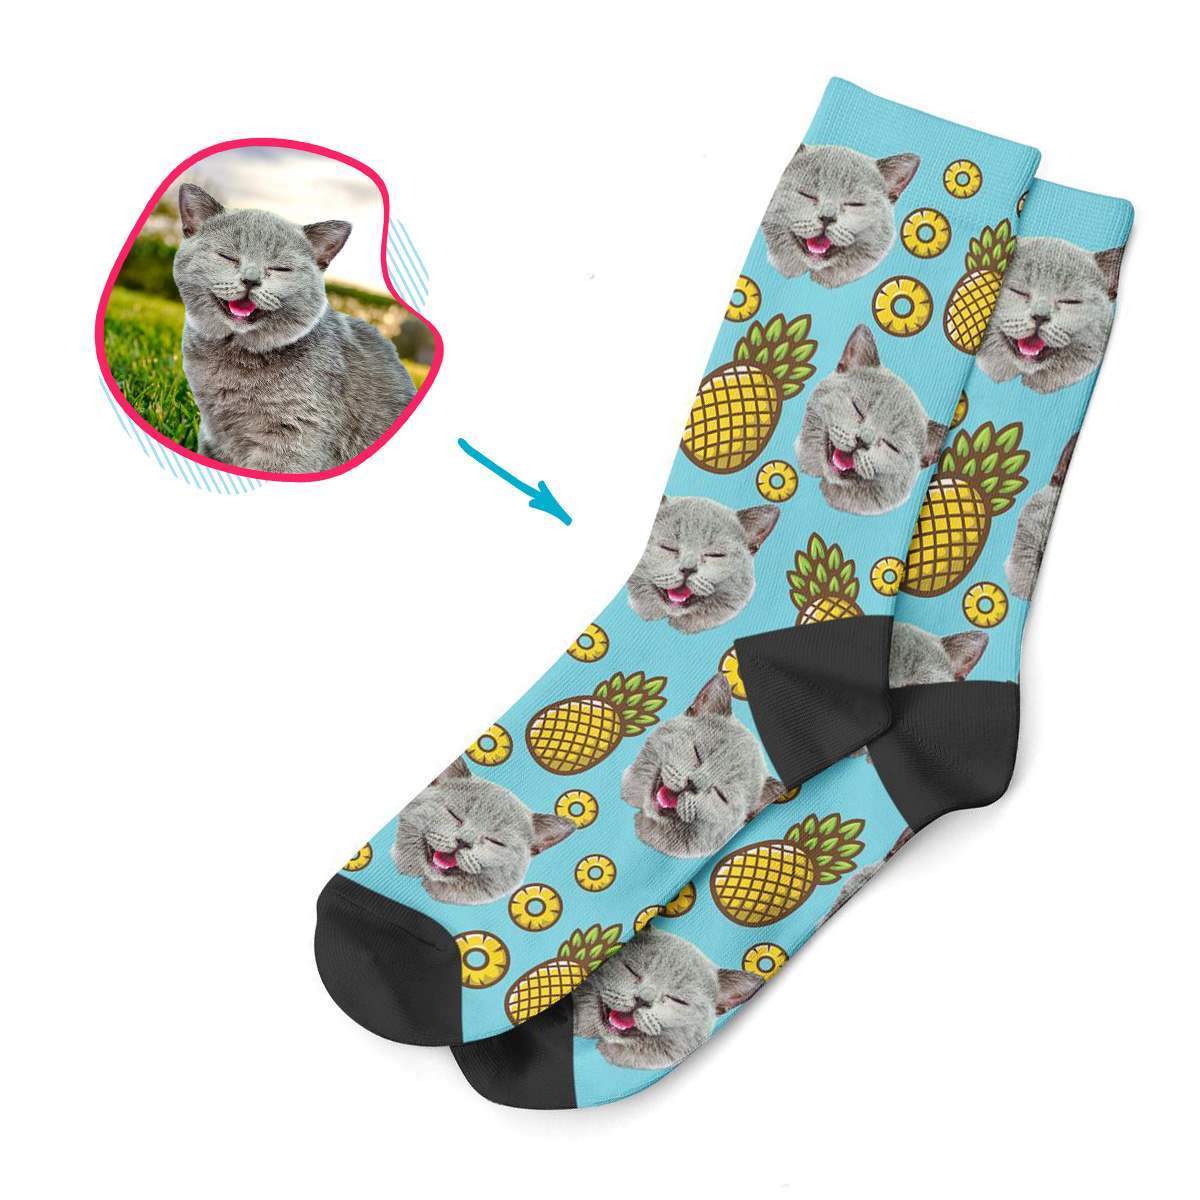 blue Fruits socks personalized with photo of face printed on them